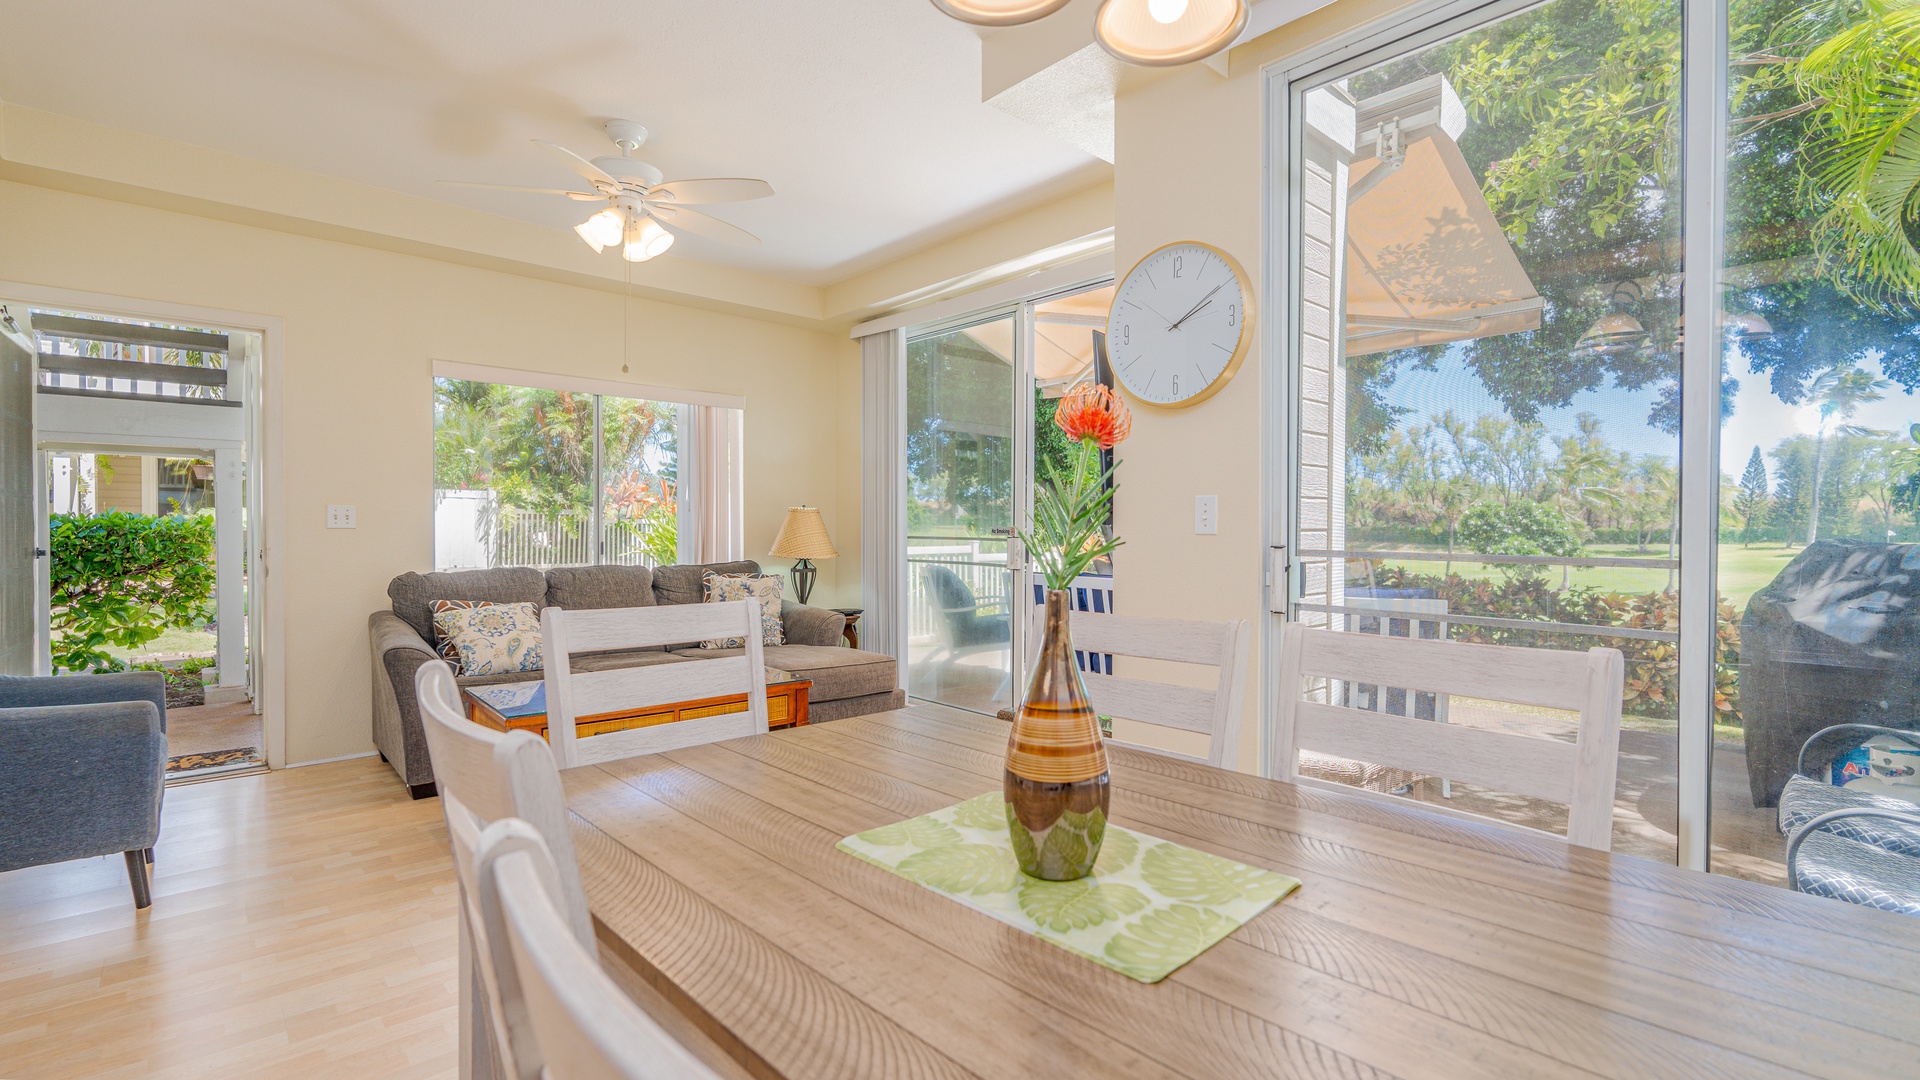 Kapolei Vacation Rentals, Fairways at Ko Olina 18C - The open living and dining areas are comfortably appointed with natural lighting.